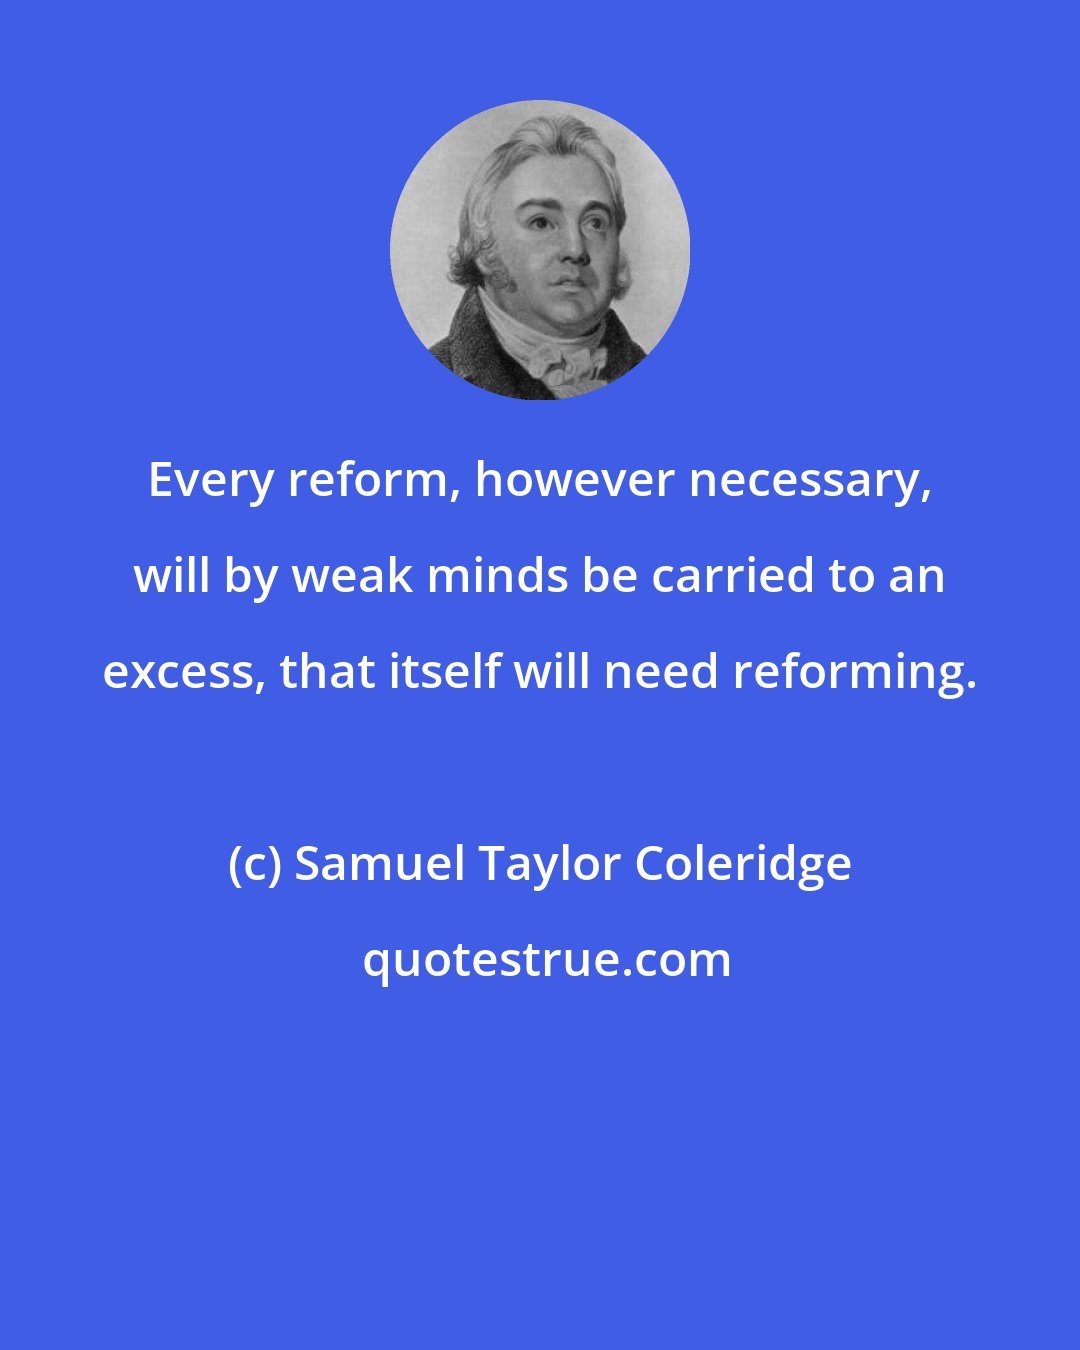 Samuel Taylor Coleridge: Every reform, however necessary, will by weak minds be carried to an excess, that itself will need reforming.